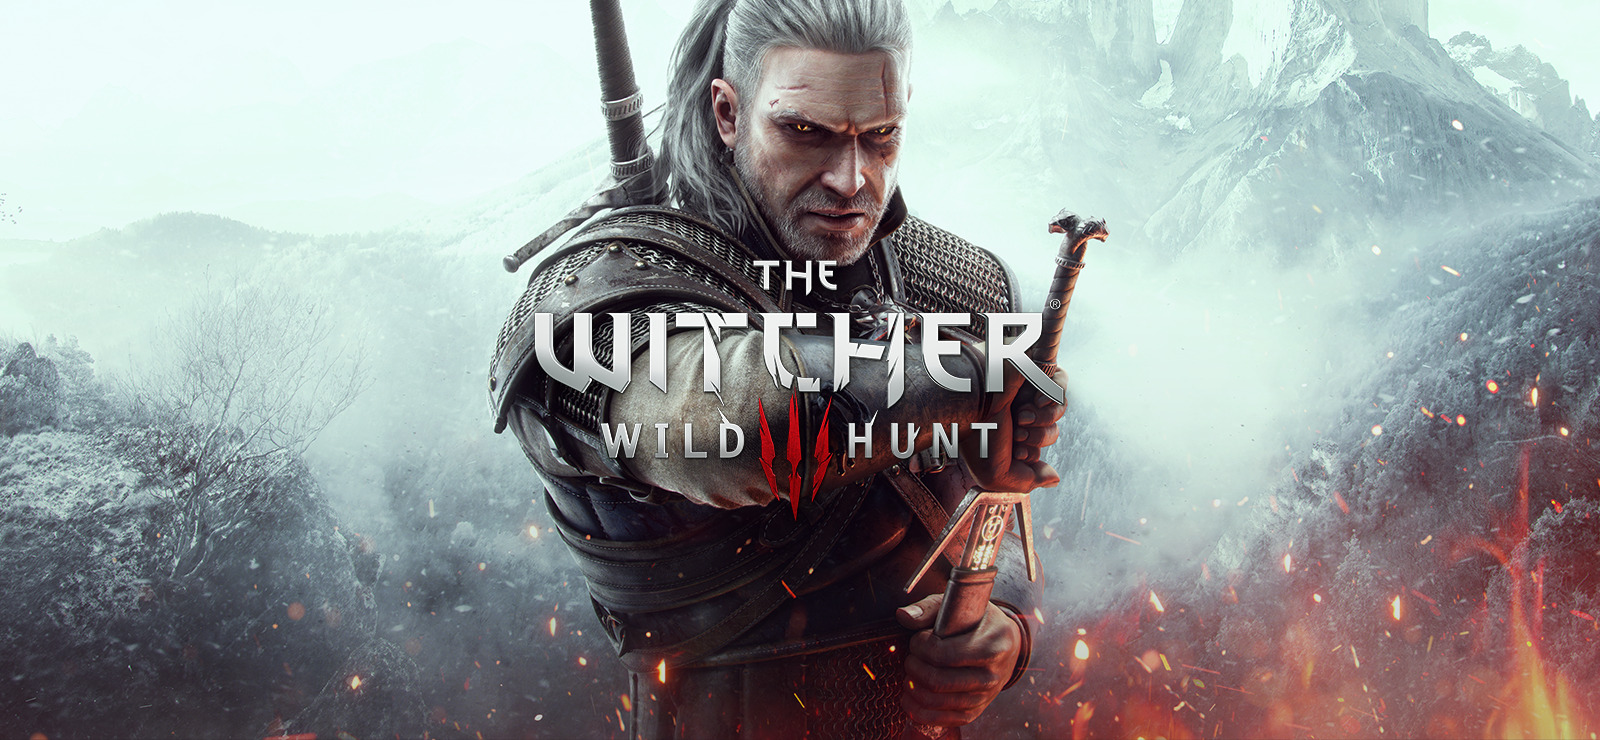 CD Projekt Red Introduces Official Modding Tool for The Witcher 3: Wild Hunt, Playtesting Underway on Steam